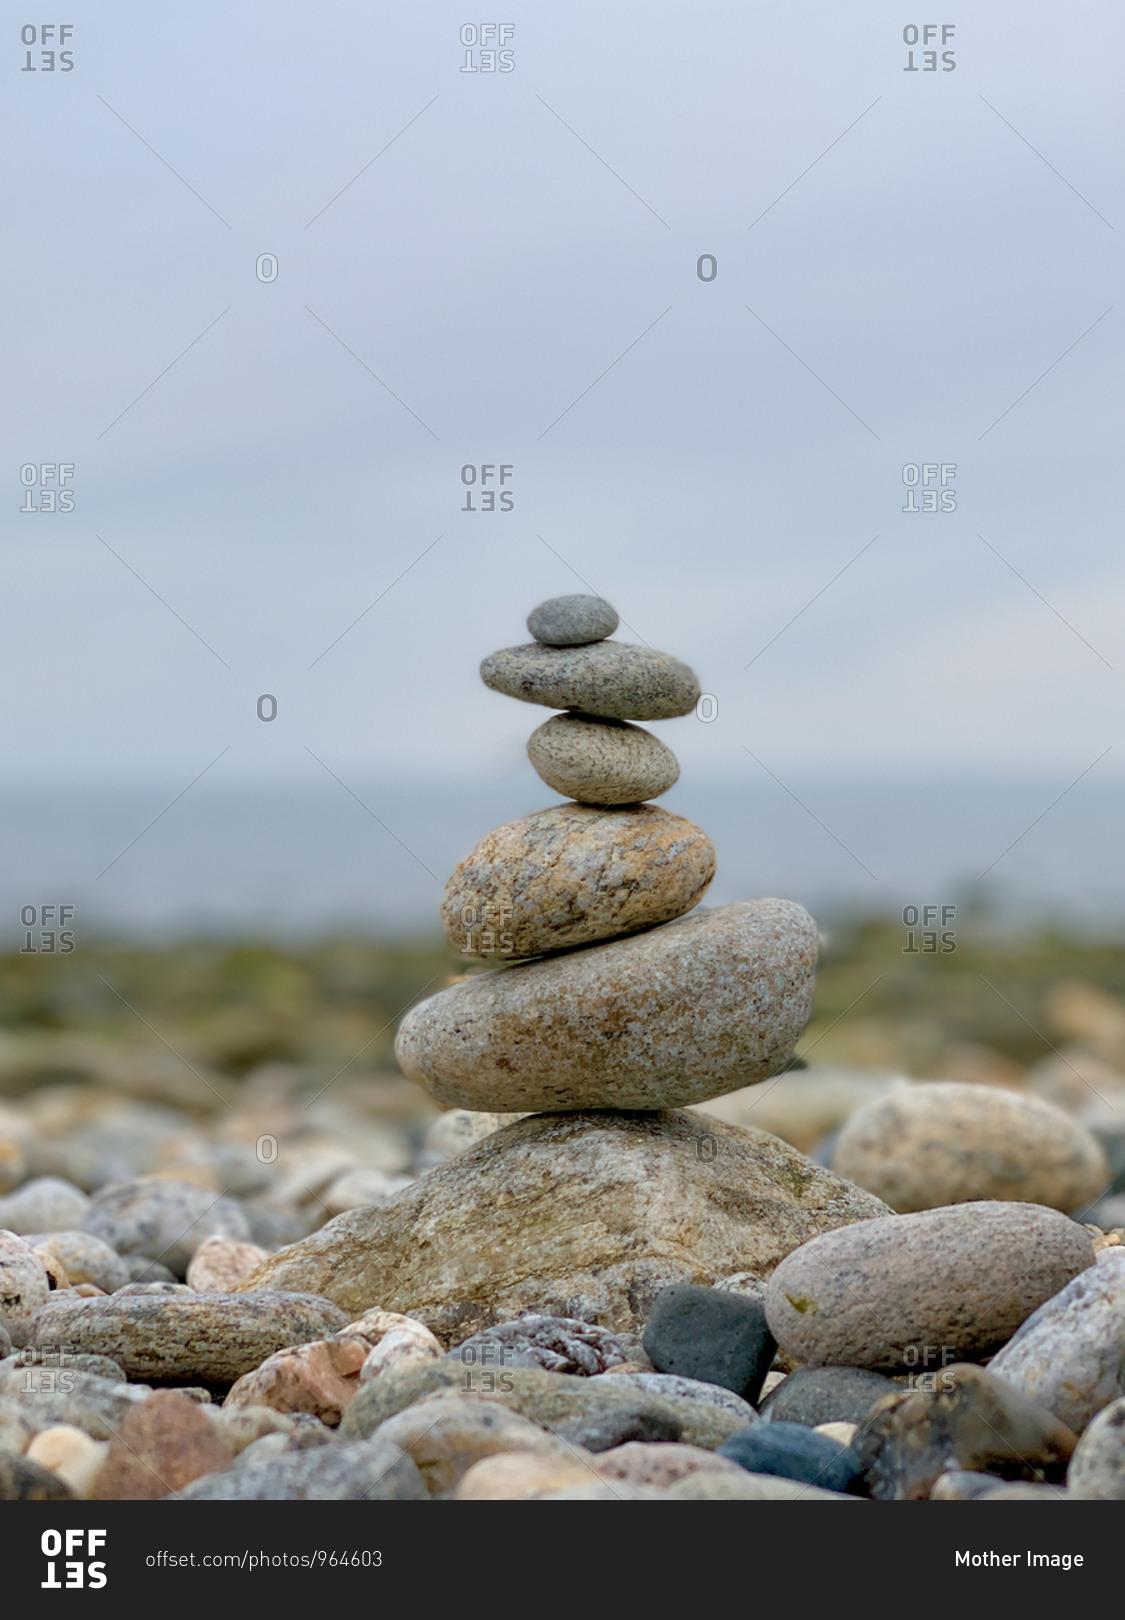 Delicately placed rocks on top of each other near coastline creating a serene and calm effect